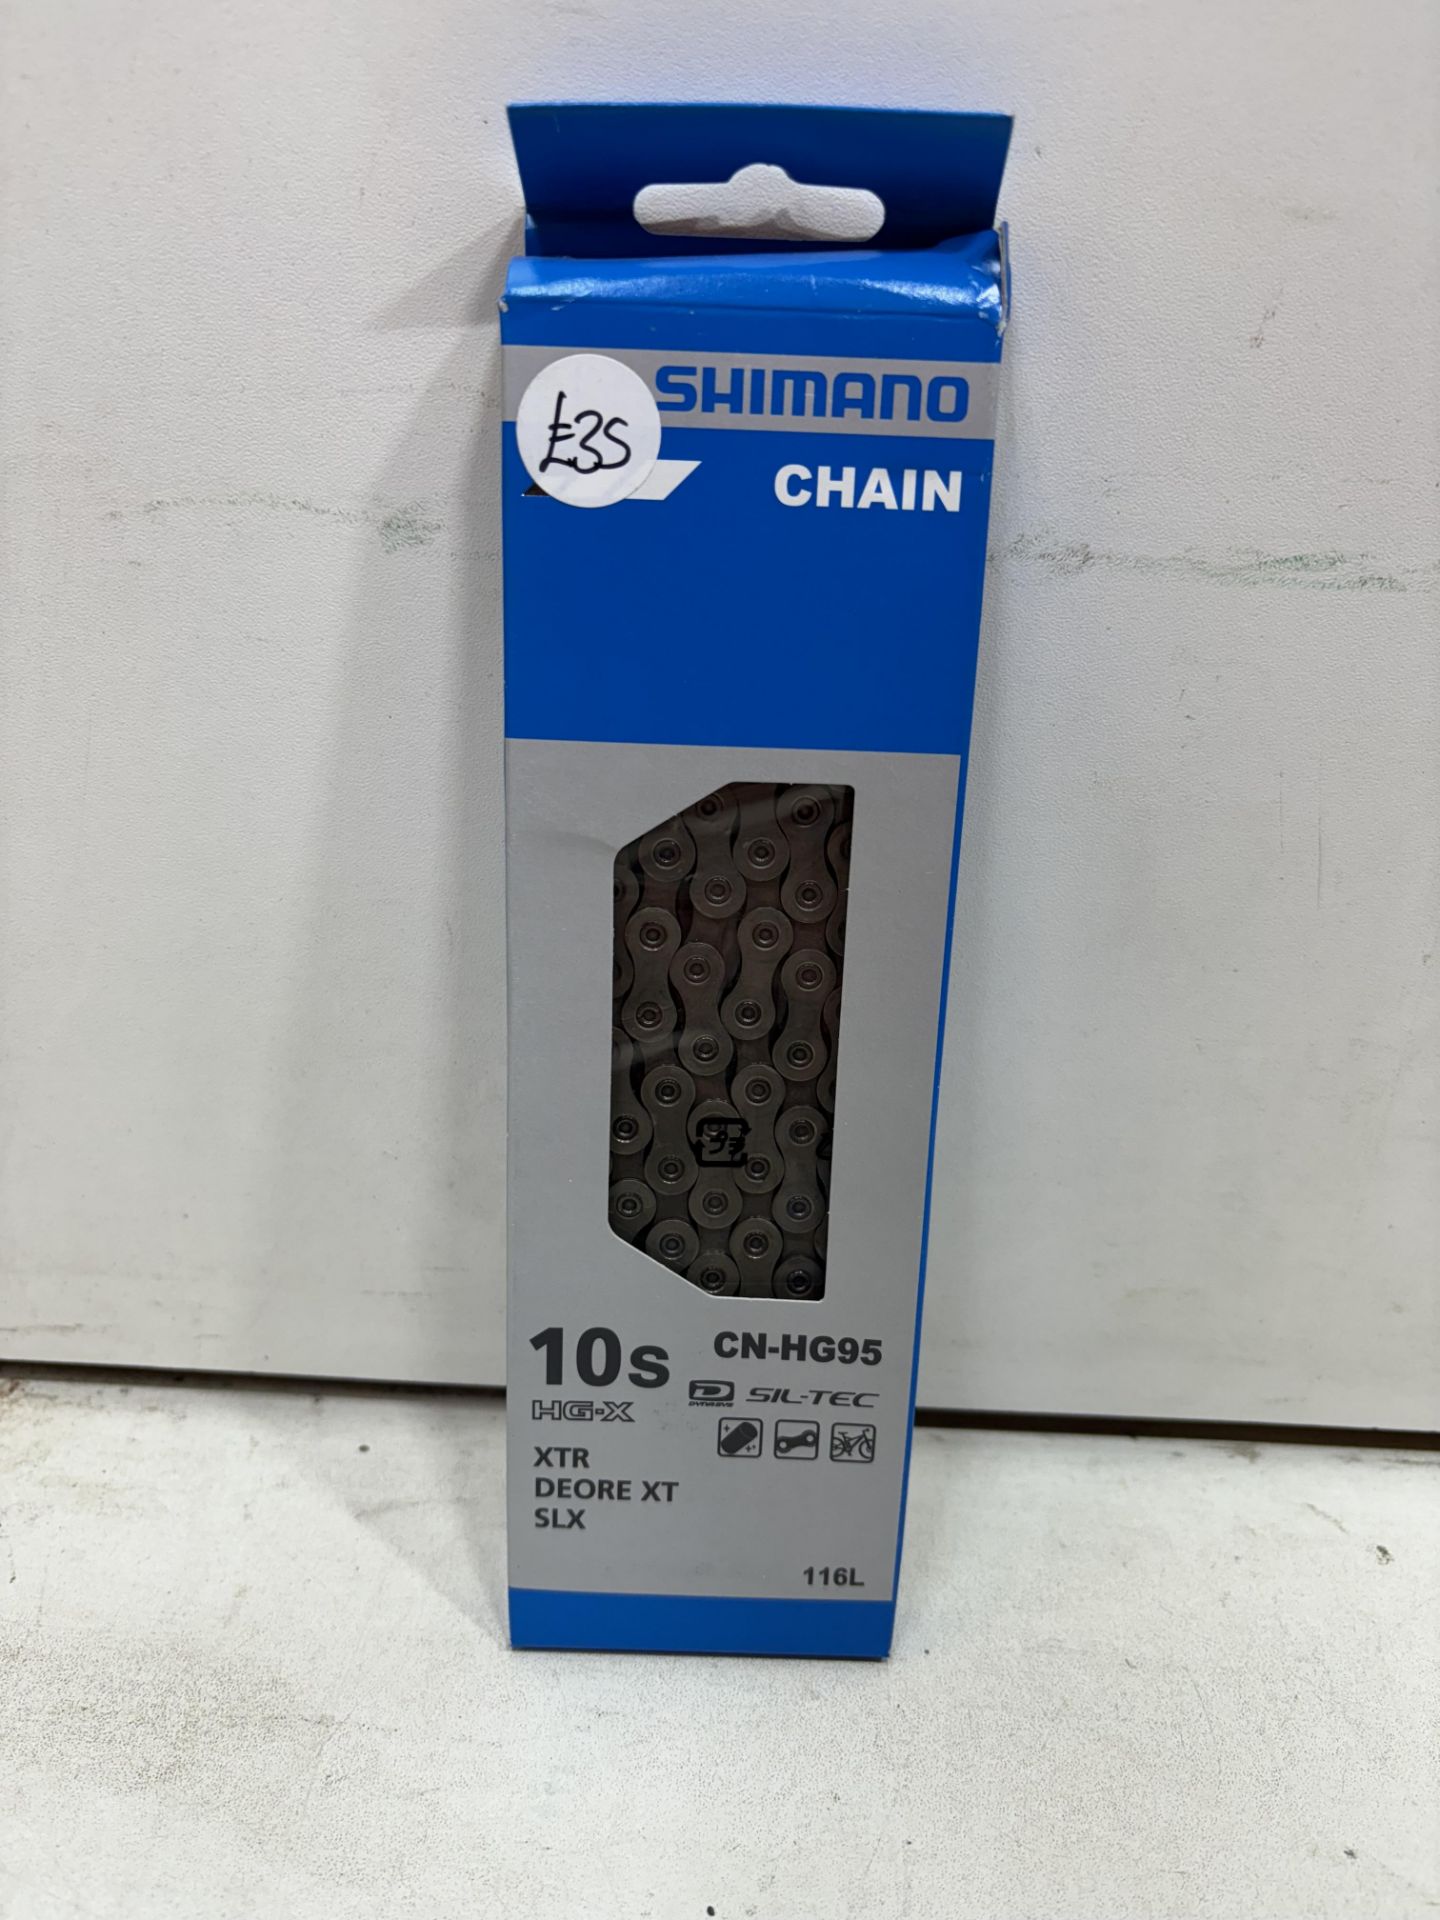 4 x Shimano CN-HG95 Deore XT 10-Speed Mountain Bicycle Chains,116 Links - Image 4 of 4